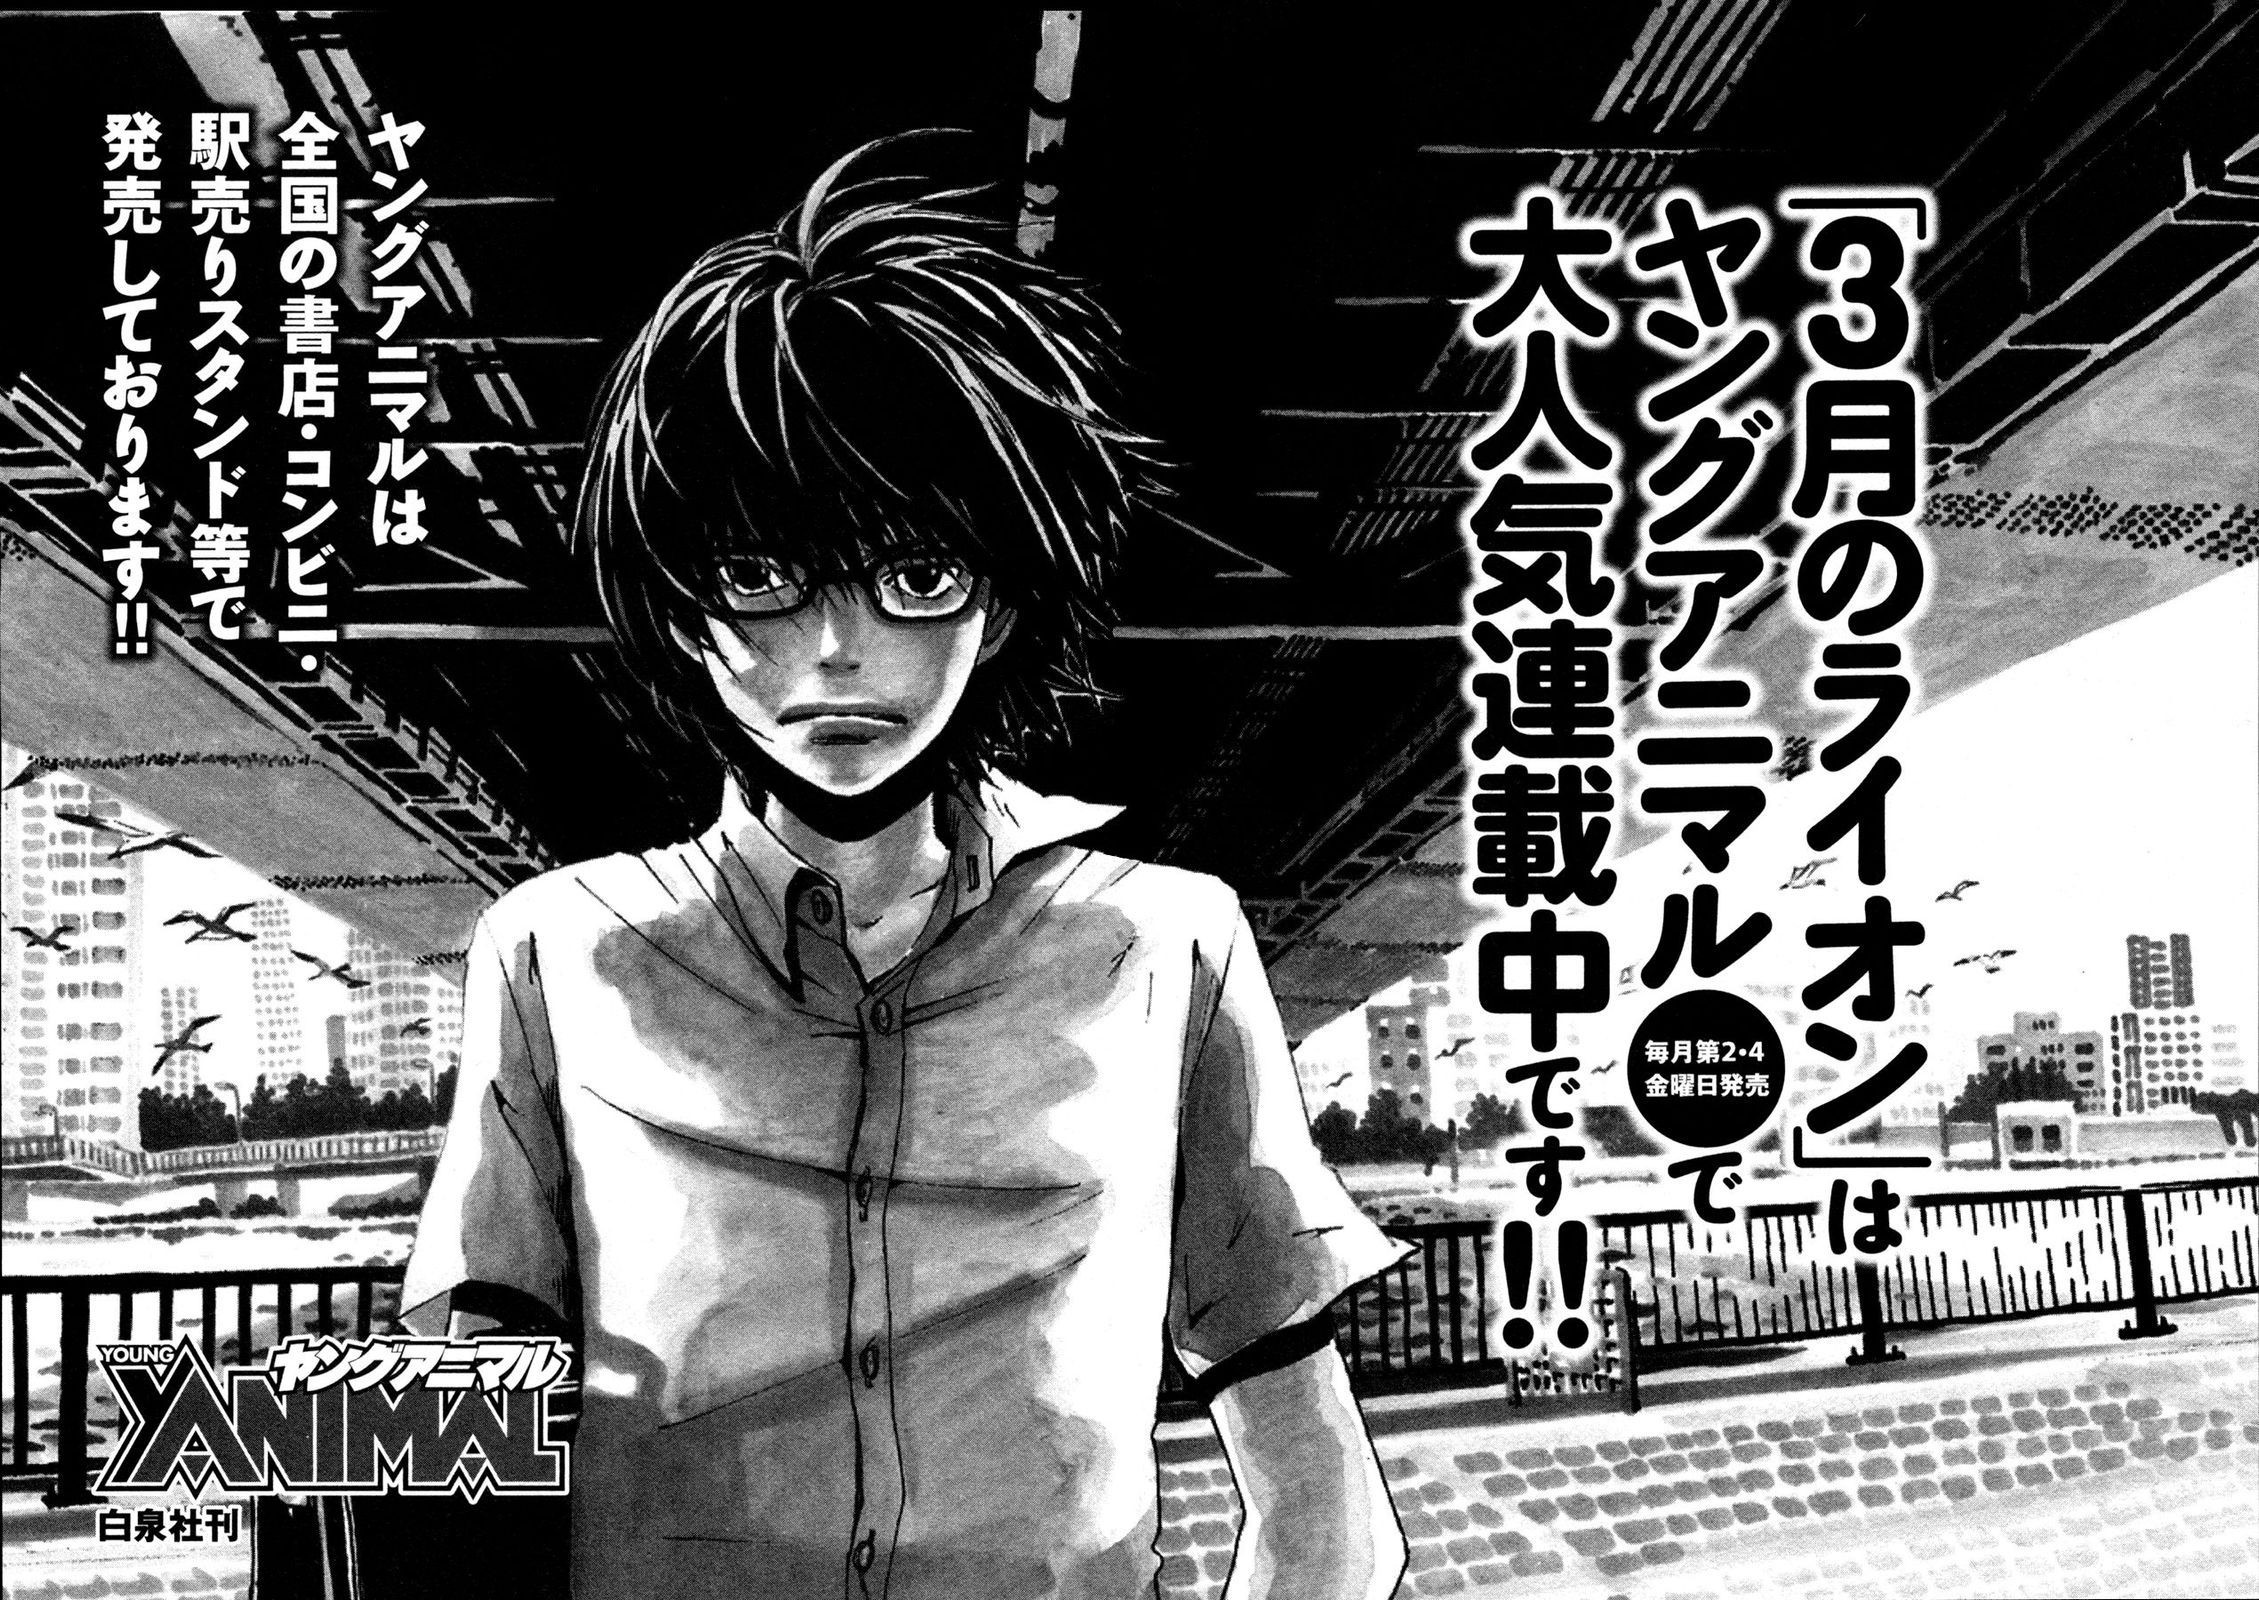 March Comes in Like a Lion, Chapter 139.5 Vol 13 Extra (EN) image 03